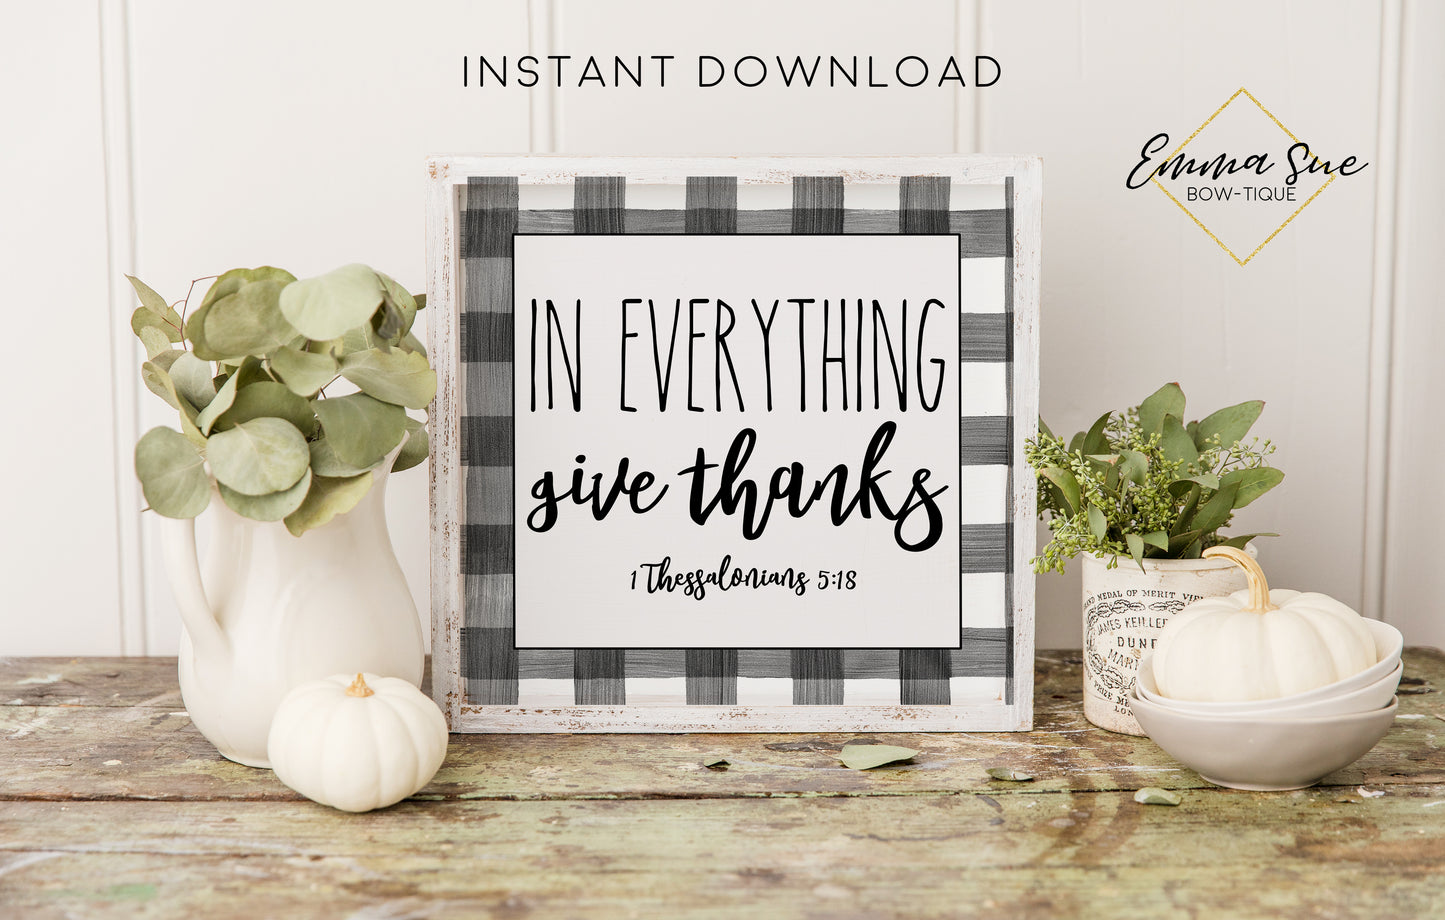 In Everything Give Thanks Bible Verse - 1 Thessalonians 5:18 Black & White Plaid Thanksgiving Fall Autumn Decor Printable Sign Farmhouse Style  - Digital File